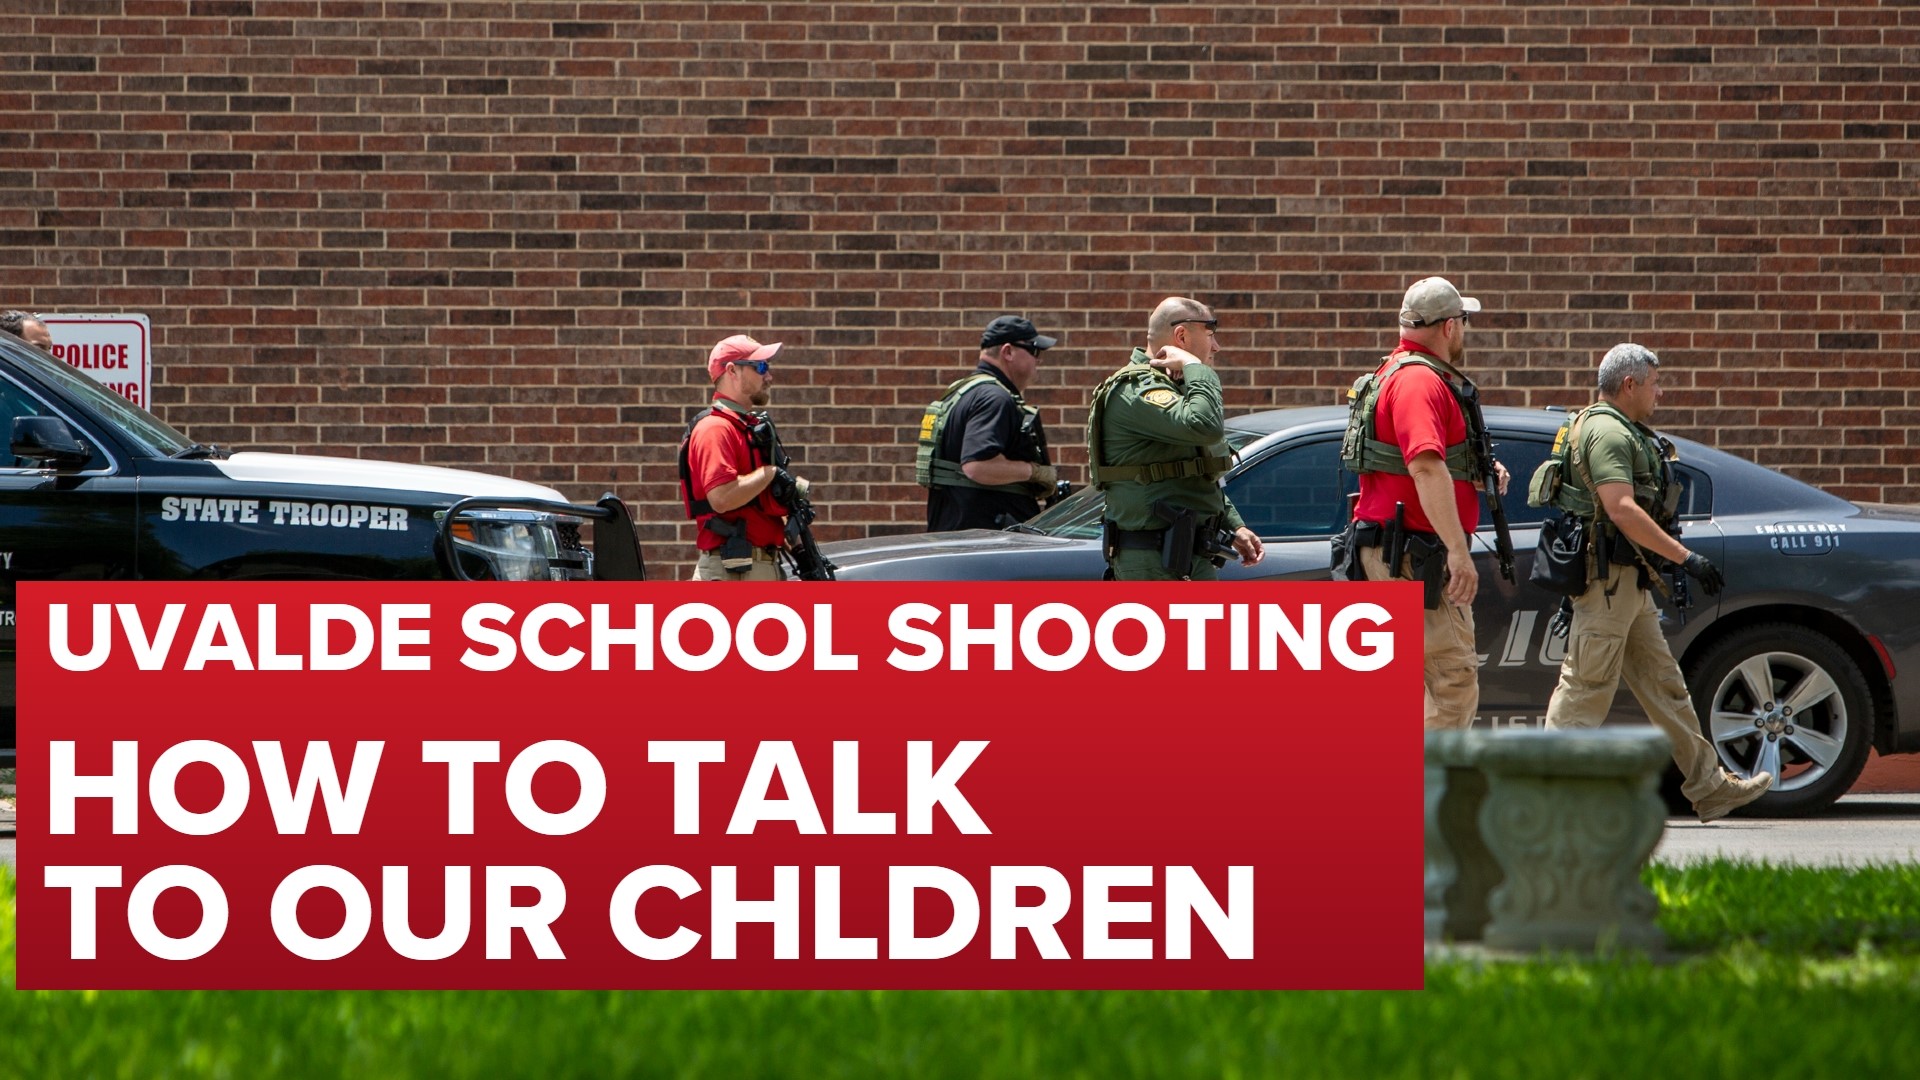 Clinical Psychologist Dr. Linda McGhee sits down with Lesli Foster to discuss how to talk to your children about the mass shooting in Ulvade, Texas